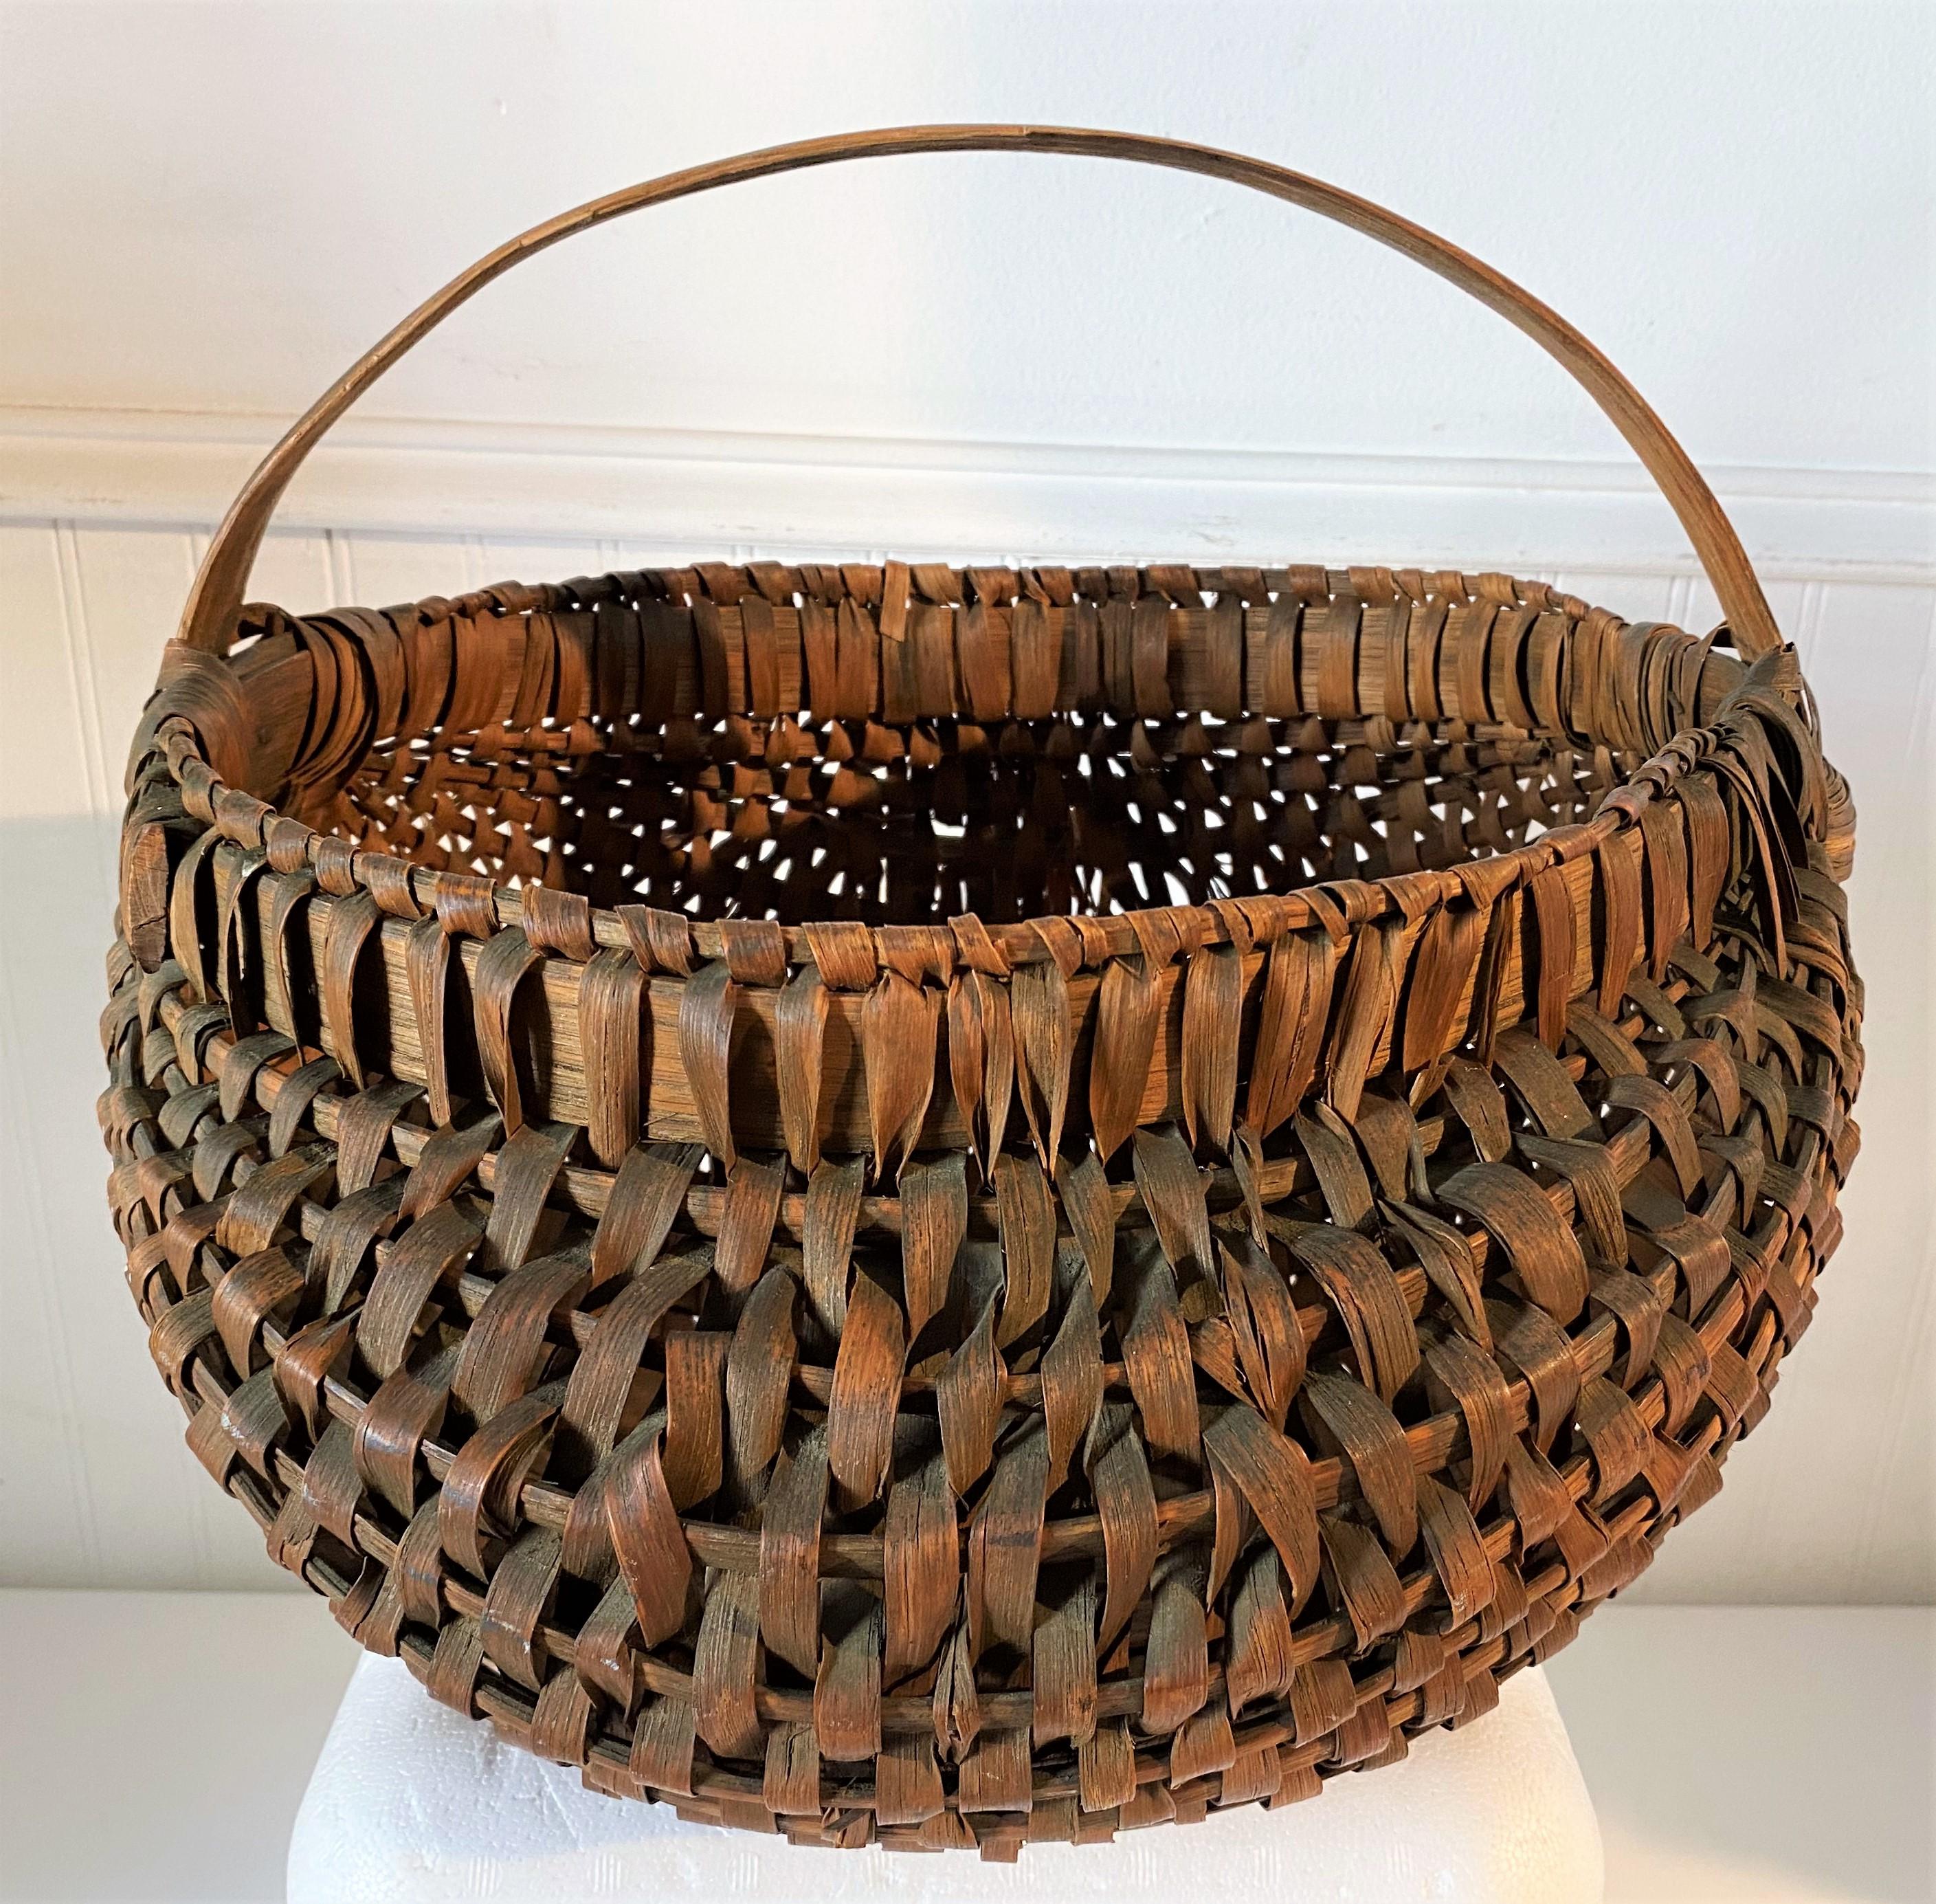 Adirondack Large 19th C Hand Woven Buttocks Handled Basket from New England